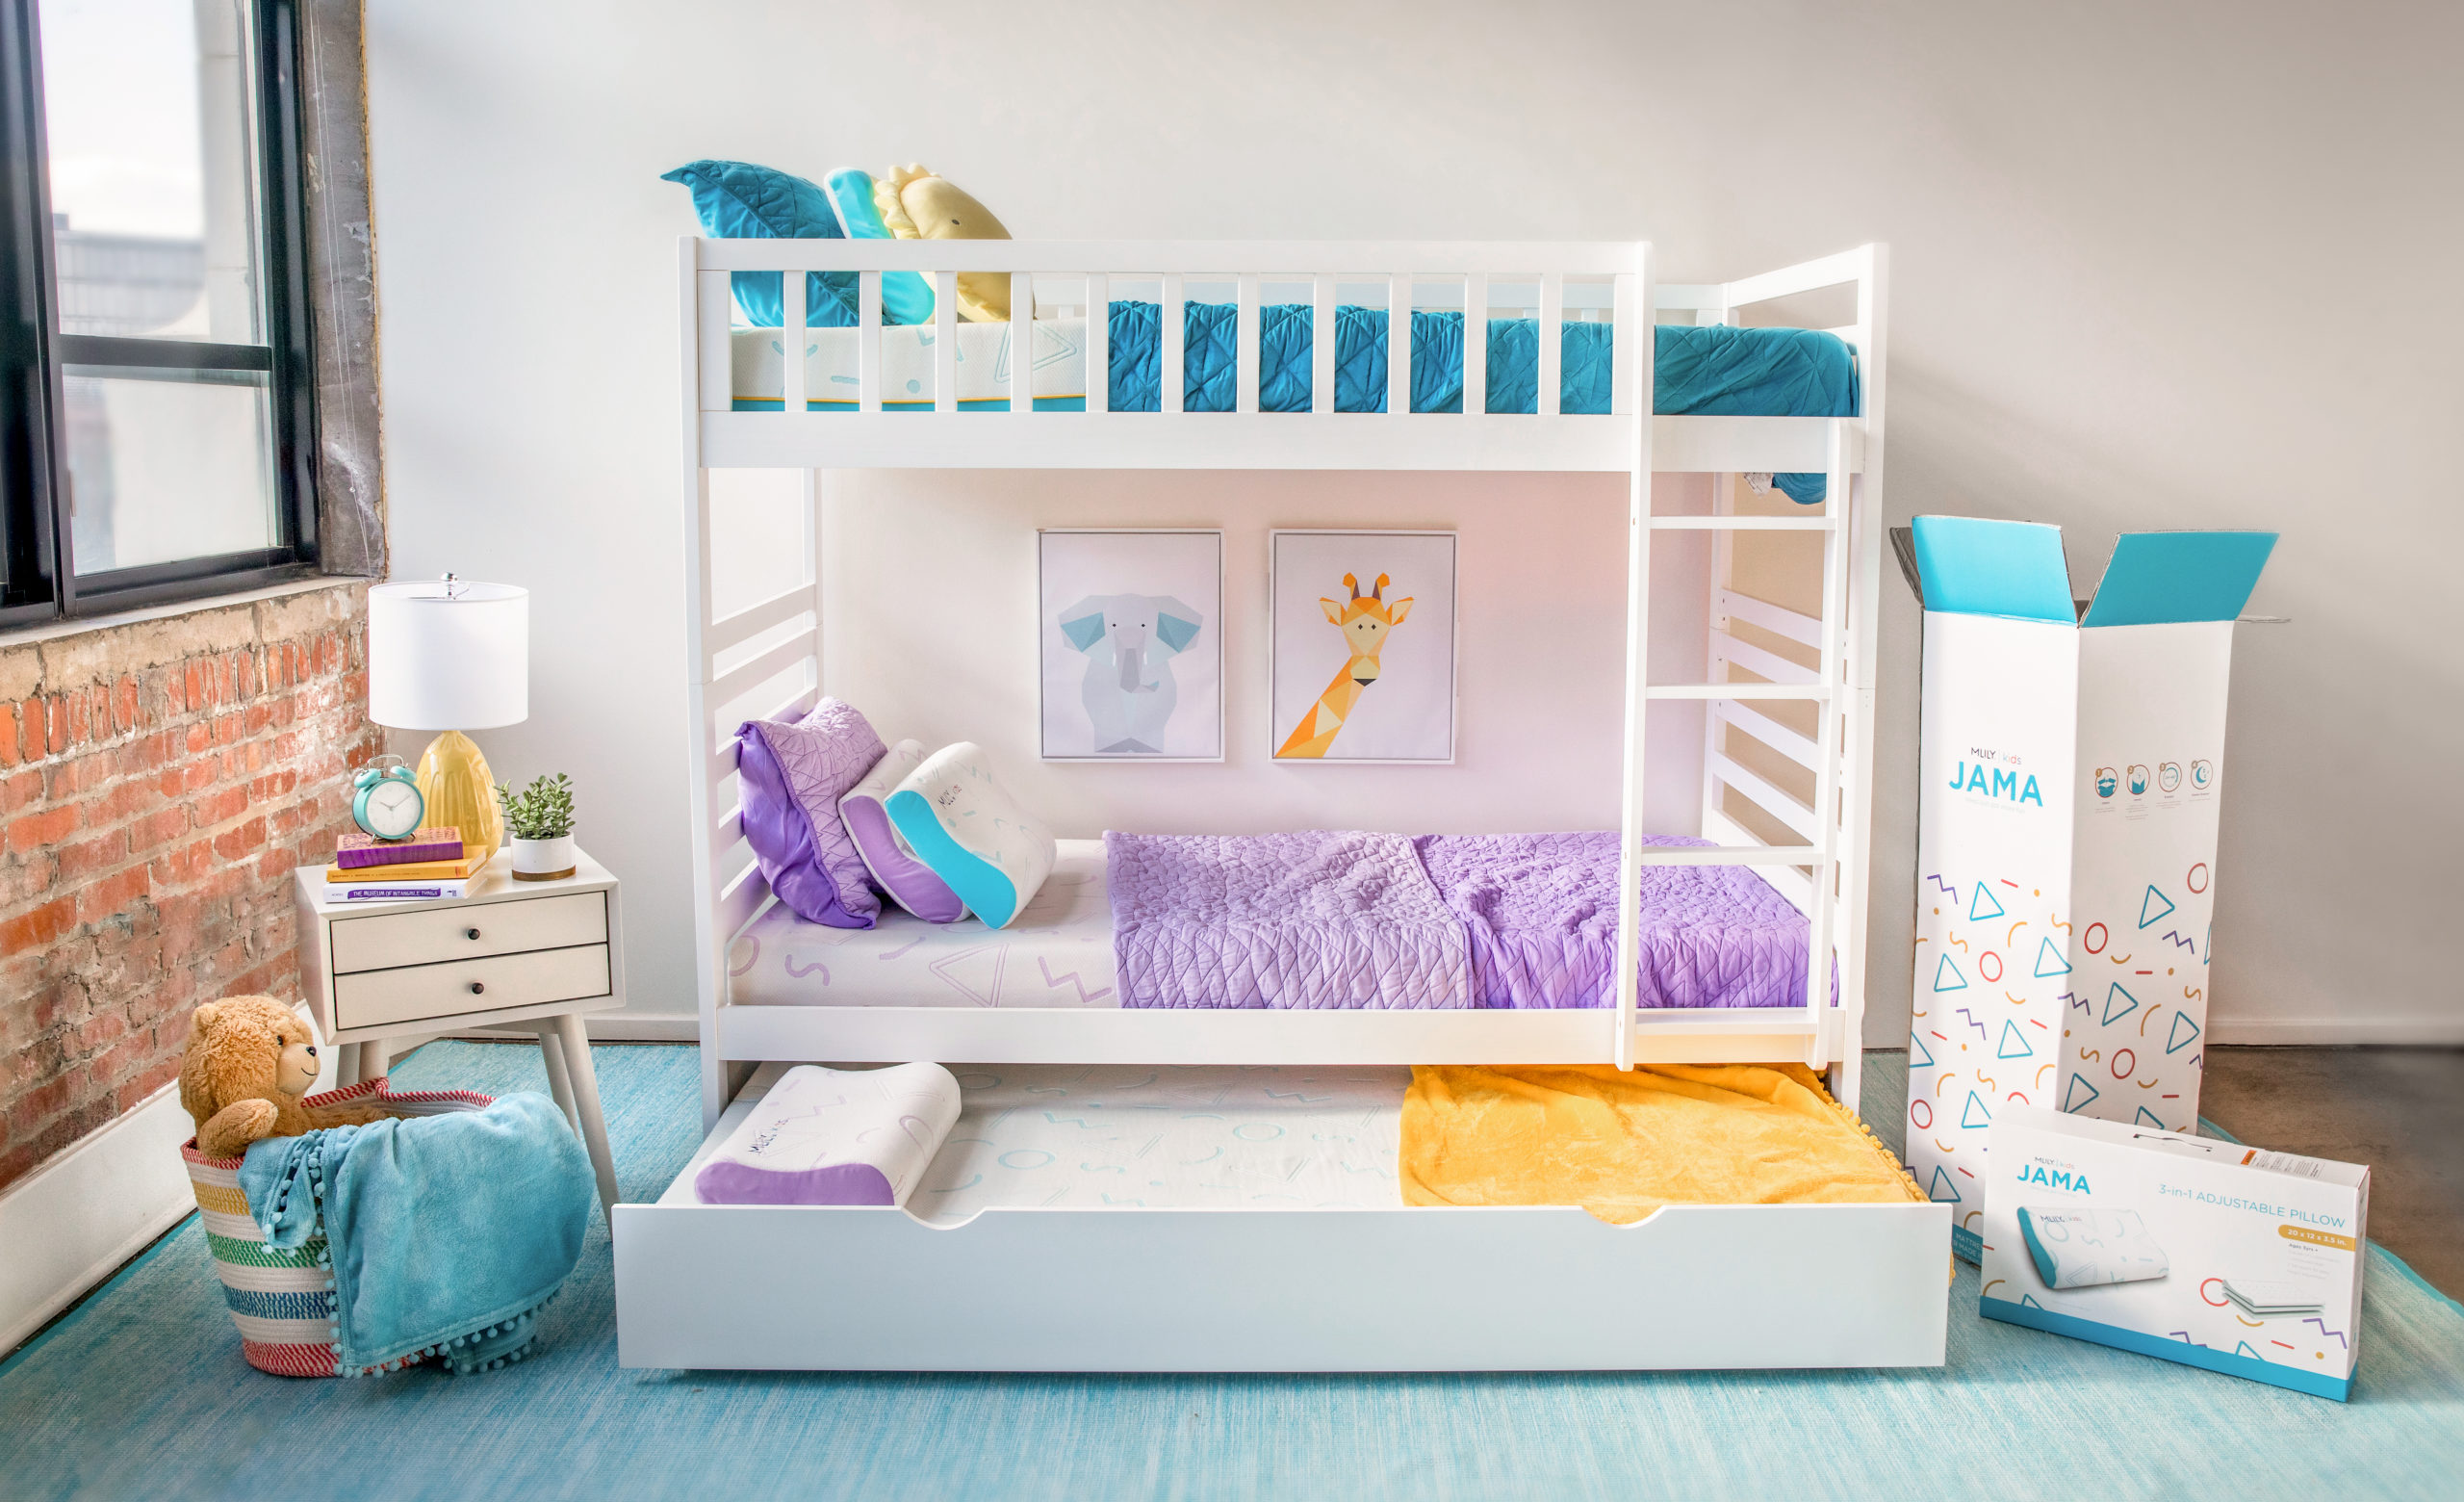 Kids bedroom with a bunk bed and trundle extended with purple and teal bedding; large MLILY box, bedside table, and toy basket with a stuffed bear.